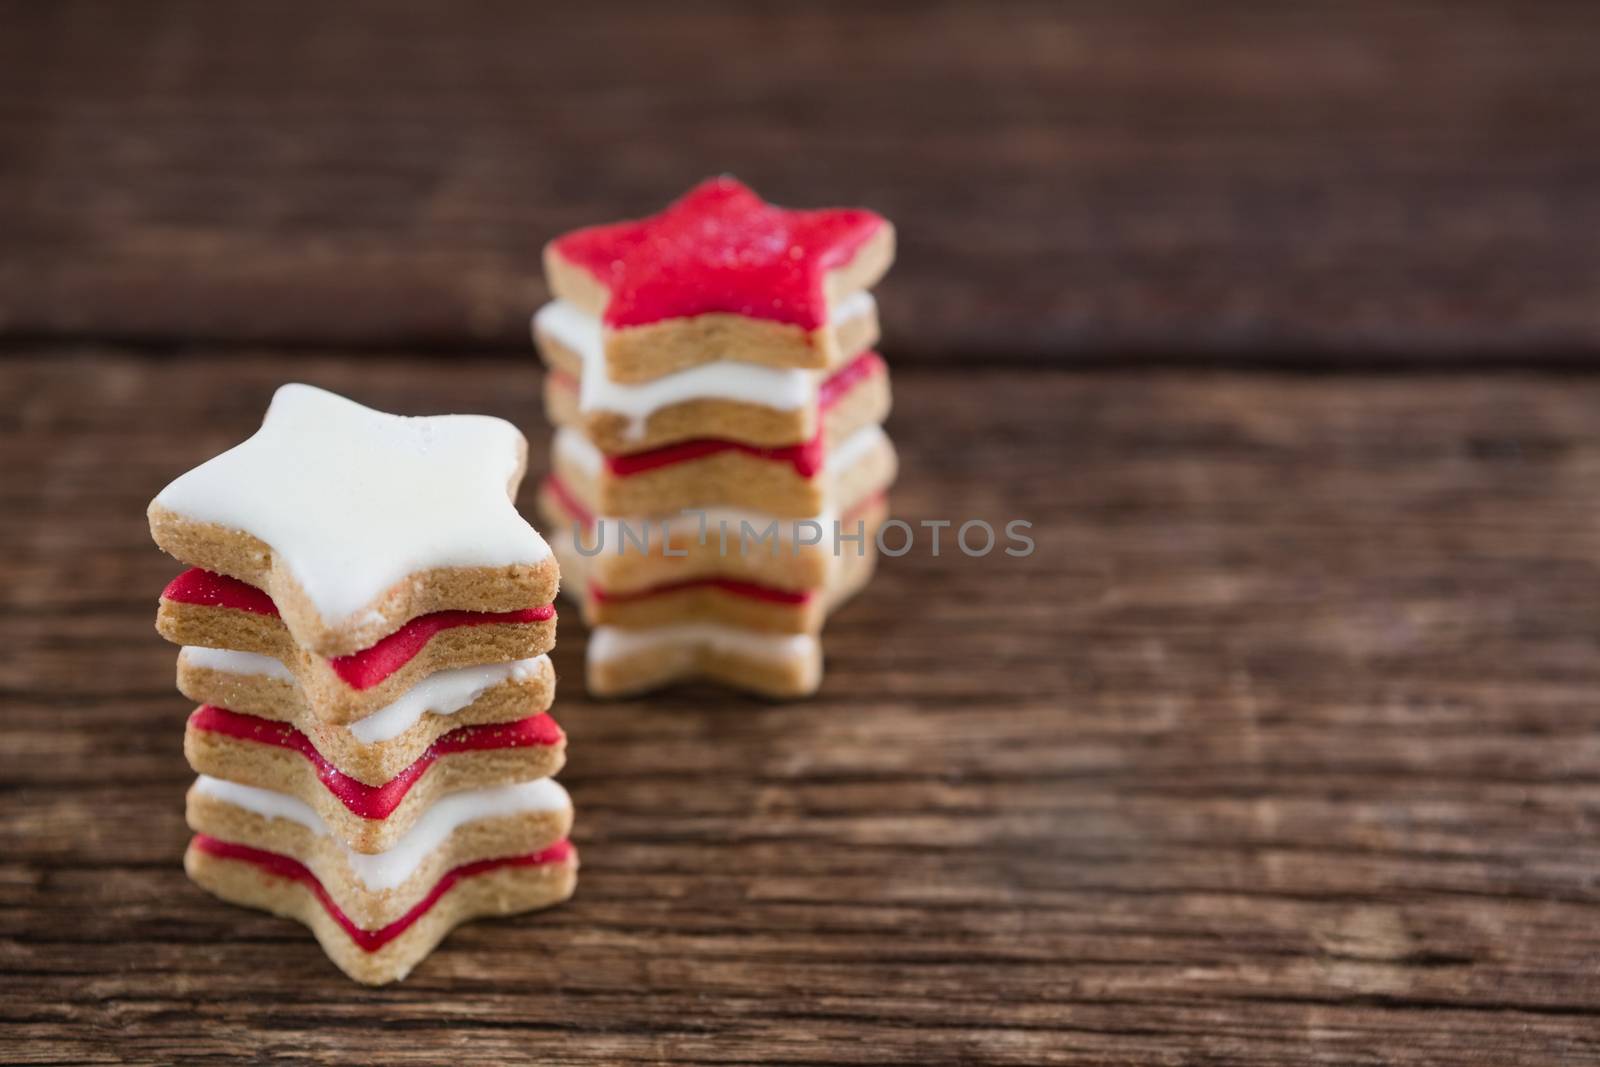 Red and white sugar cookies stacked on wooden table for 4th of July